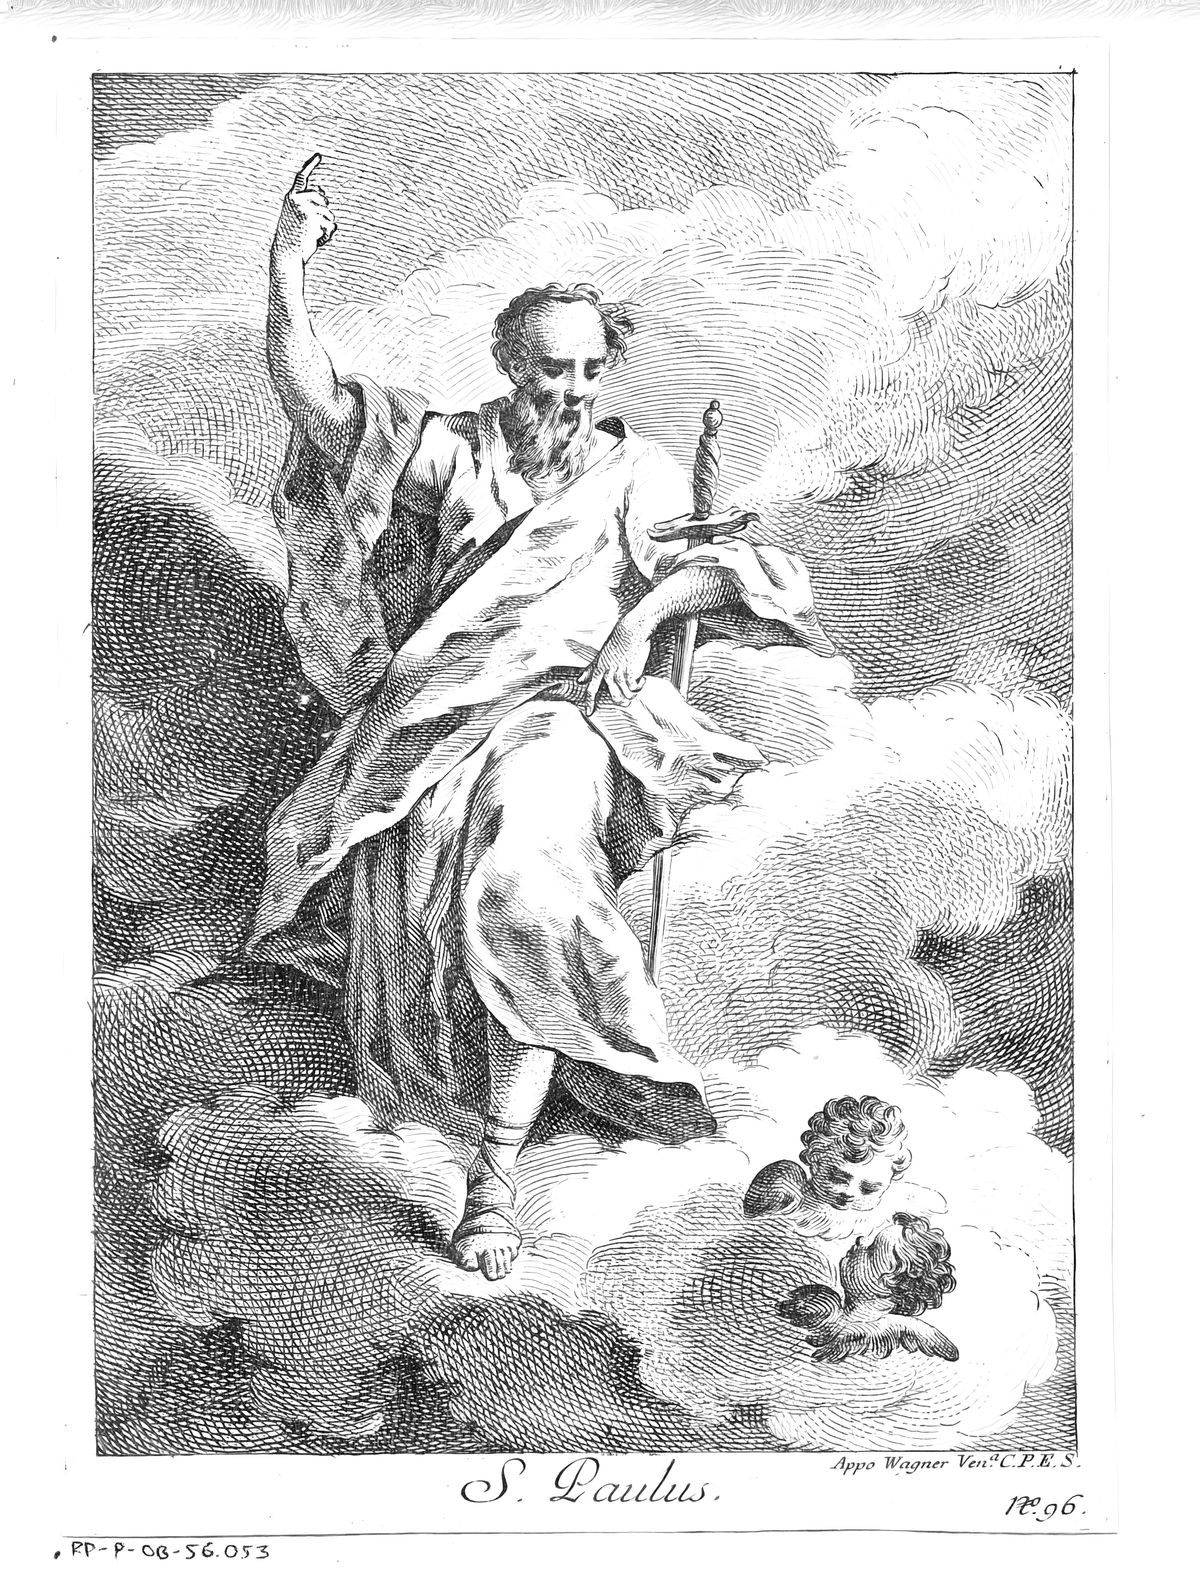 Saint Paul (1739-1780) by Joseph Wagner (possibly) - Catholic Coloring Page